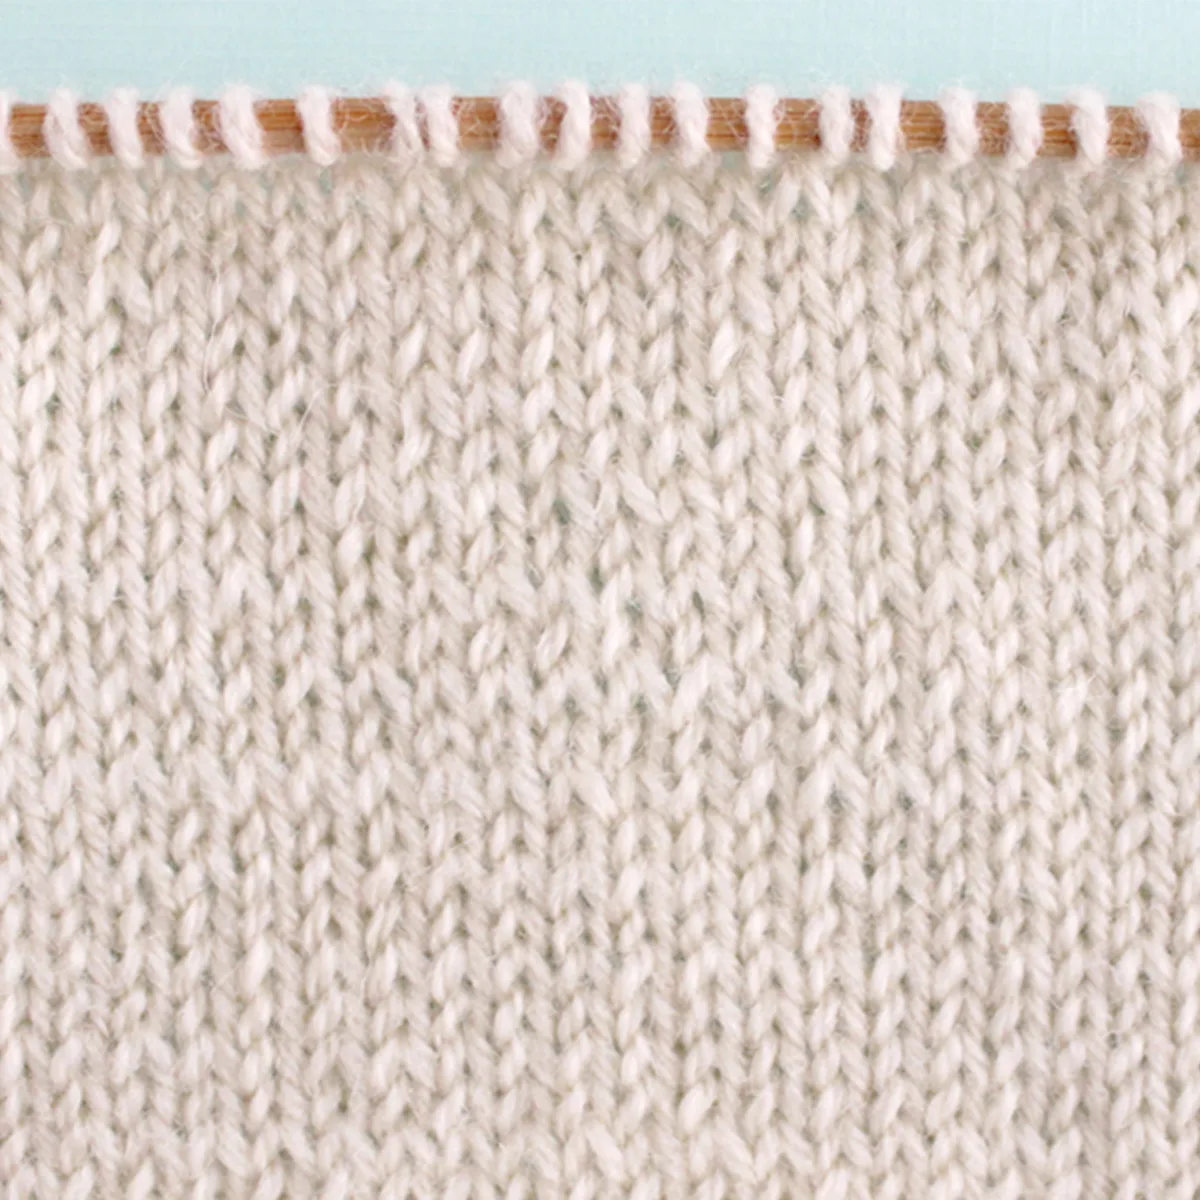 Stockinette Knit Stitch Pattern texture in white color yarn on knitting needle.